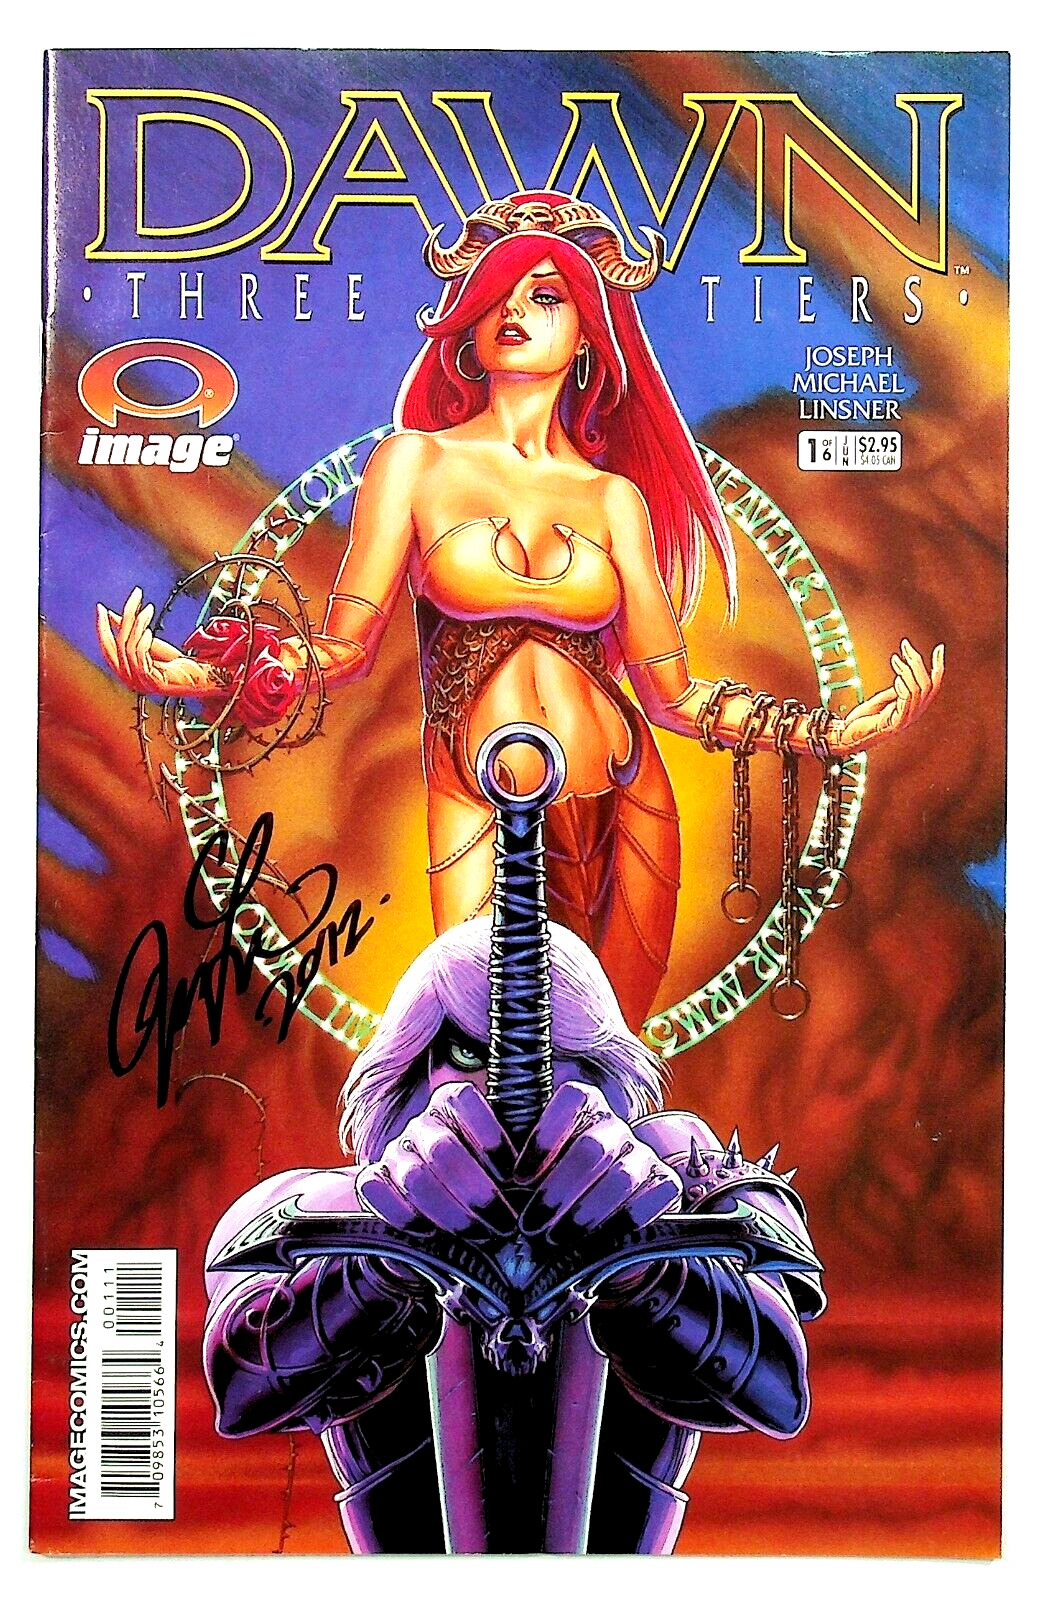 Dawn Three Tiers #1 Signed by Signed Joseph Michael Linsner Sirius Comics